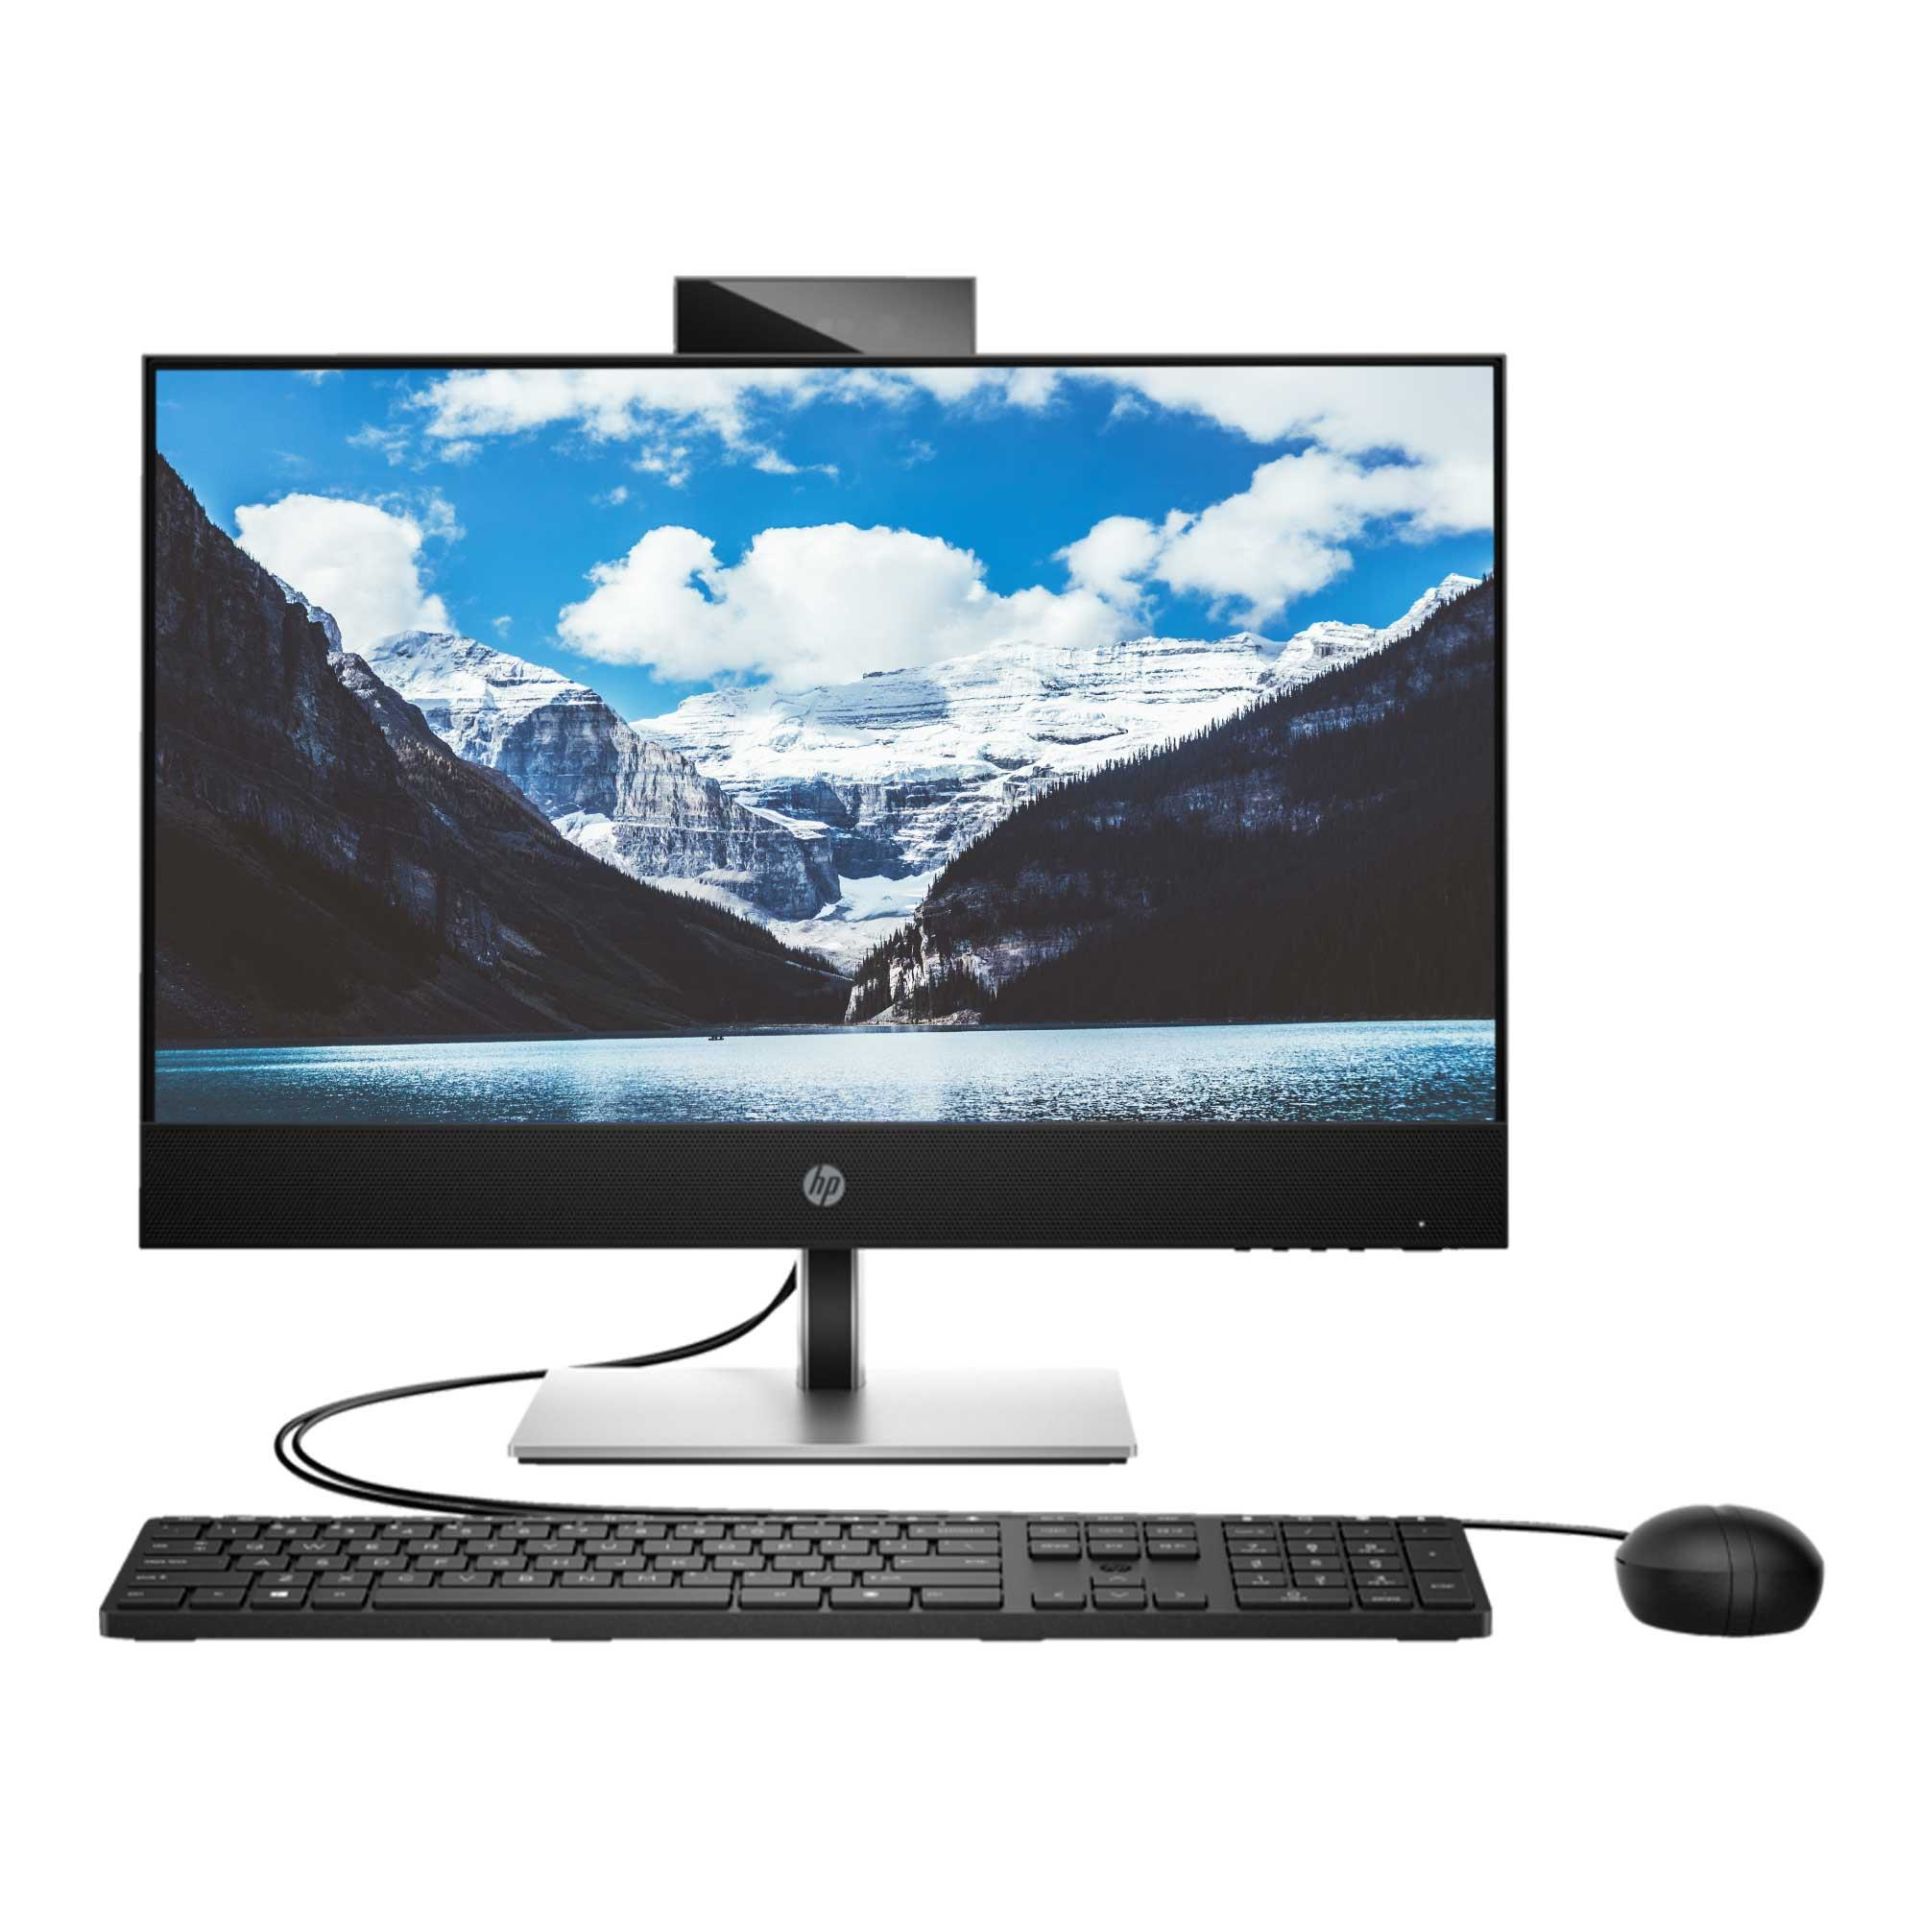 HP PROONE 440 AIO G9 884A0EA I7-13700T 16GB 512 SSD O/B VGA 23.8" NONTOUCH FREDOOS ALL IN ONE PC